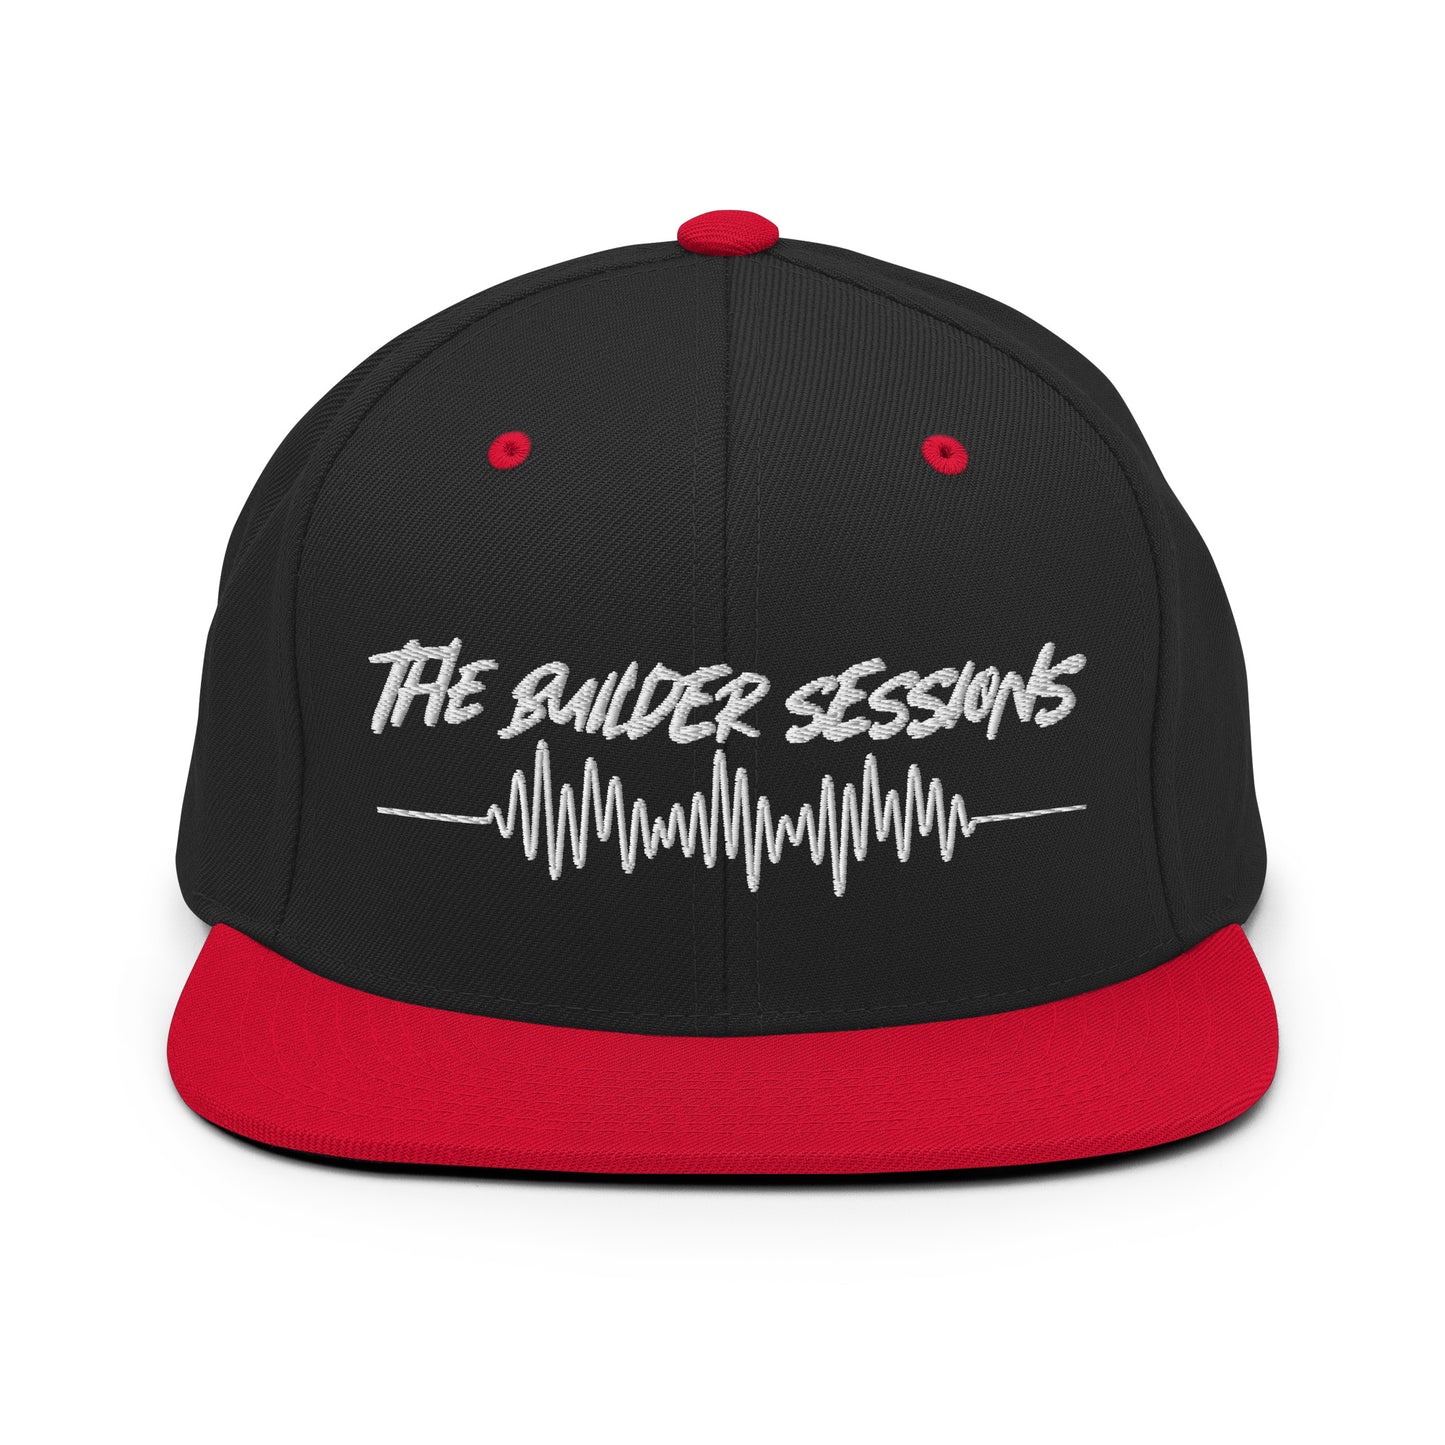 The Builder Sessions Snapback Hat